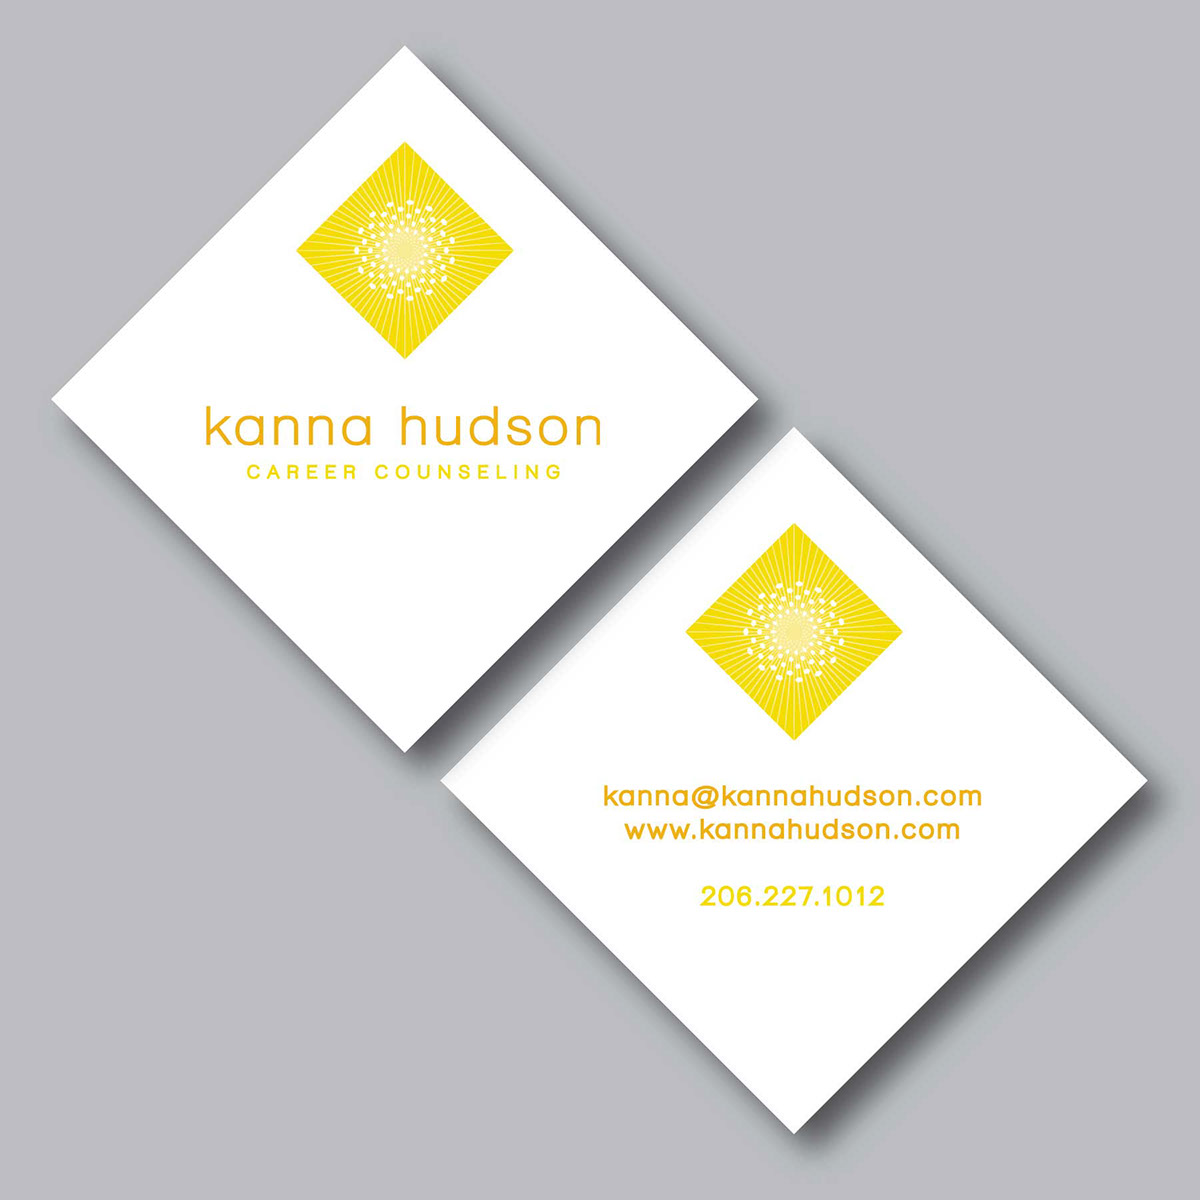 Business Cards brand identity Corporate Identity Printing Production contact information